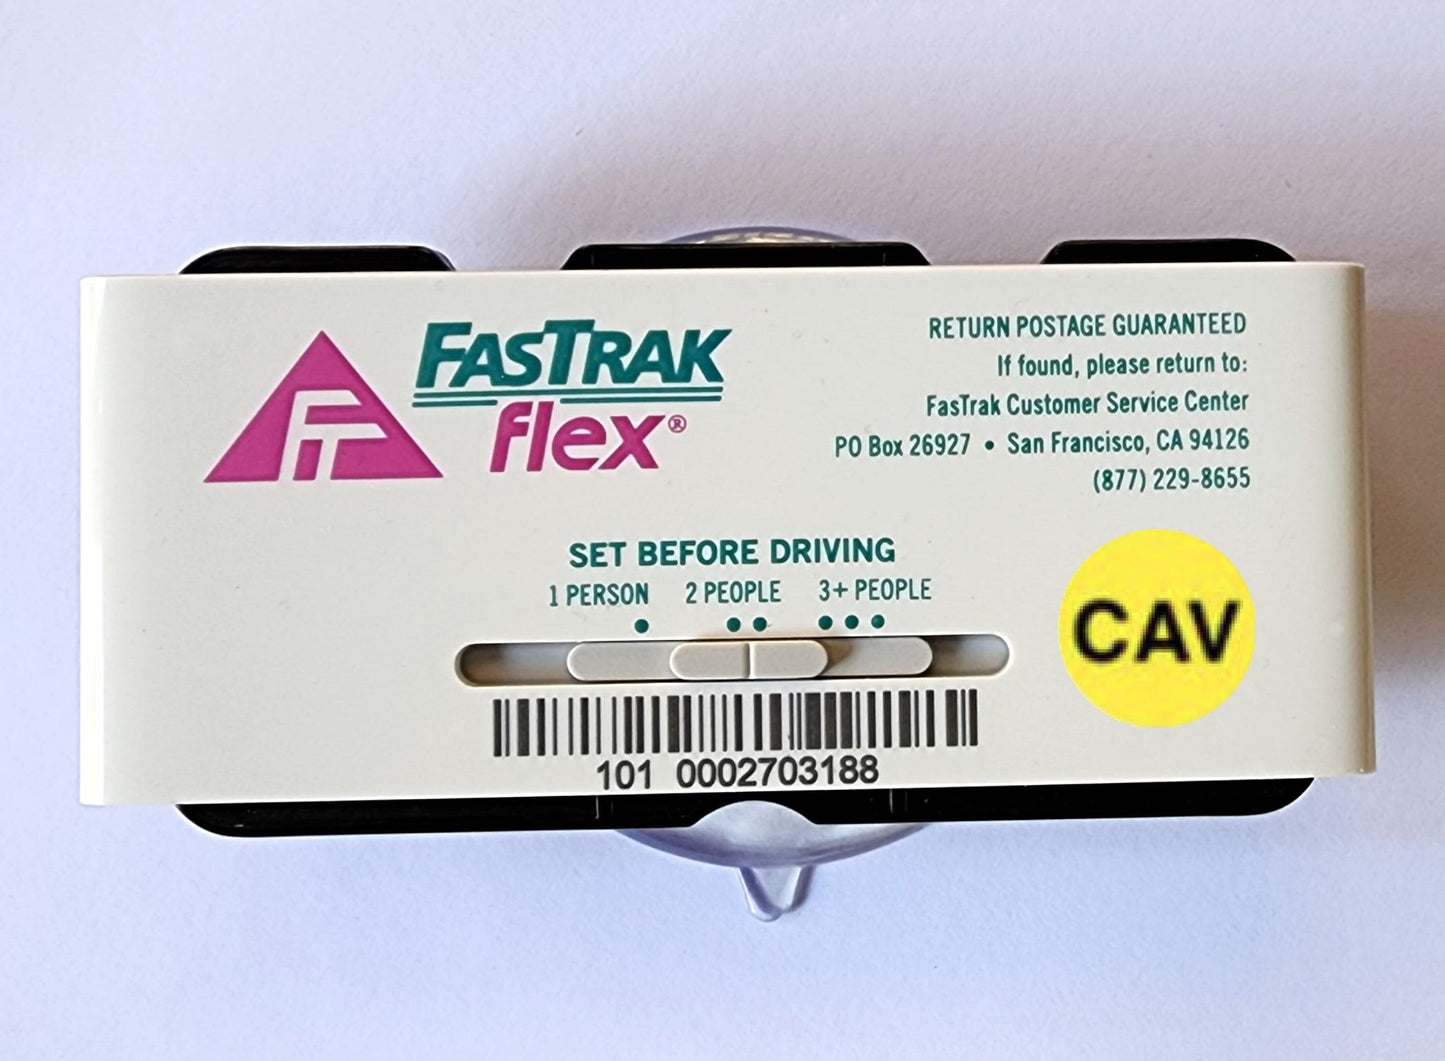 EZ Pass-Mate™ Black - Universal FasTrak Toll Pass Holder by JL Safety. Sturdy Toll Tag Holder for ALL FasTrak models including FasTrak Flex CAV and FasTrak Standard / Switchable & HOV. Comes with 3 Suction Cup Sizes and 2 Extra Strips. Made in USA